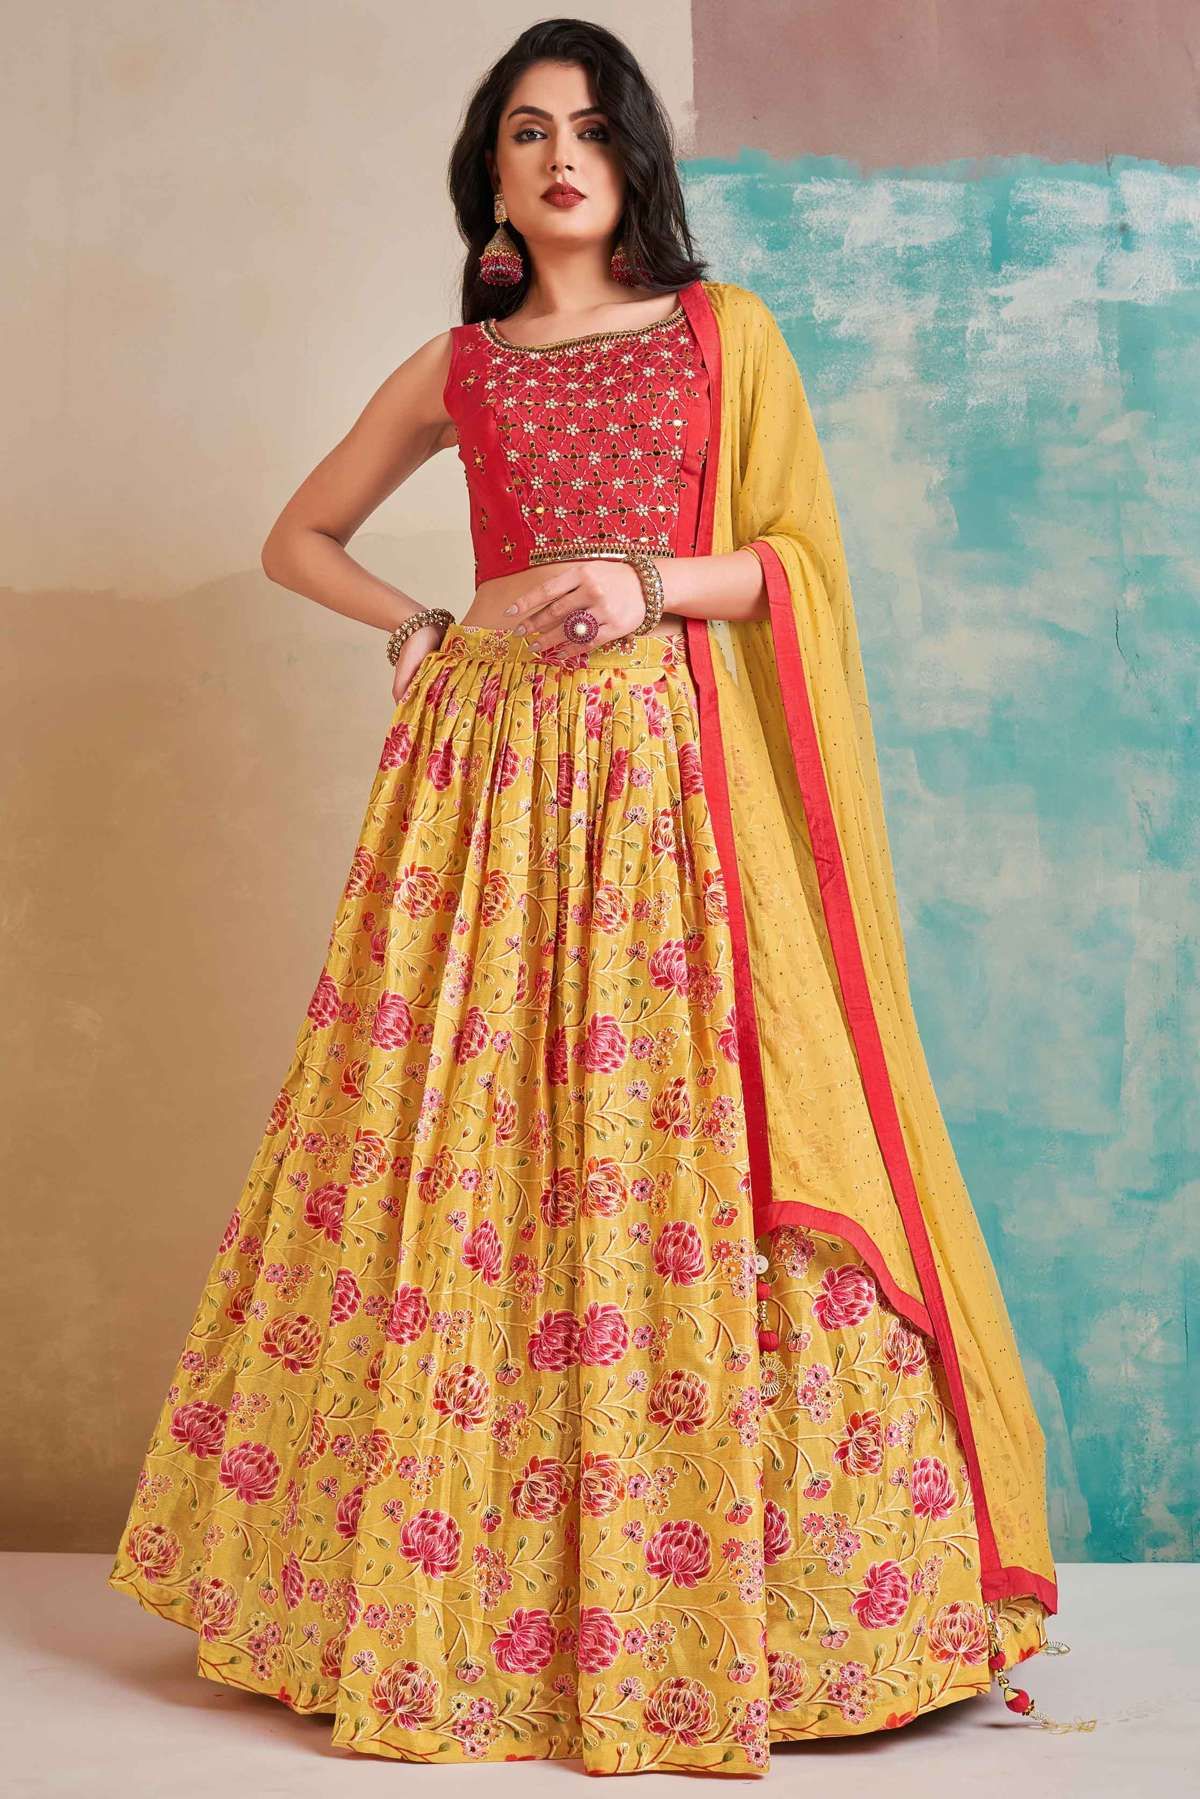 Ninecolours.com - Peach Colour Jacquard Lehenga Choli Comes With Matching  Blouse and Dupatta. This Lehenga Choli Is Crafted With Woven. This Lehenga  Choli Comes As Semi Stitched and Unstitched Blouse Which Can